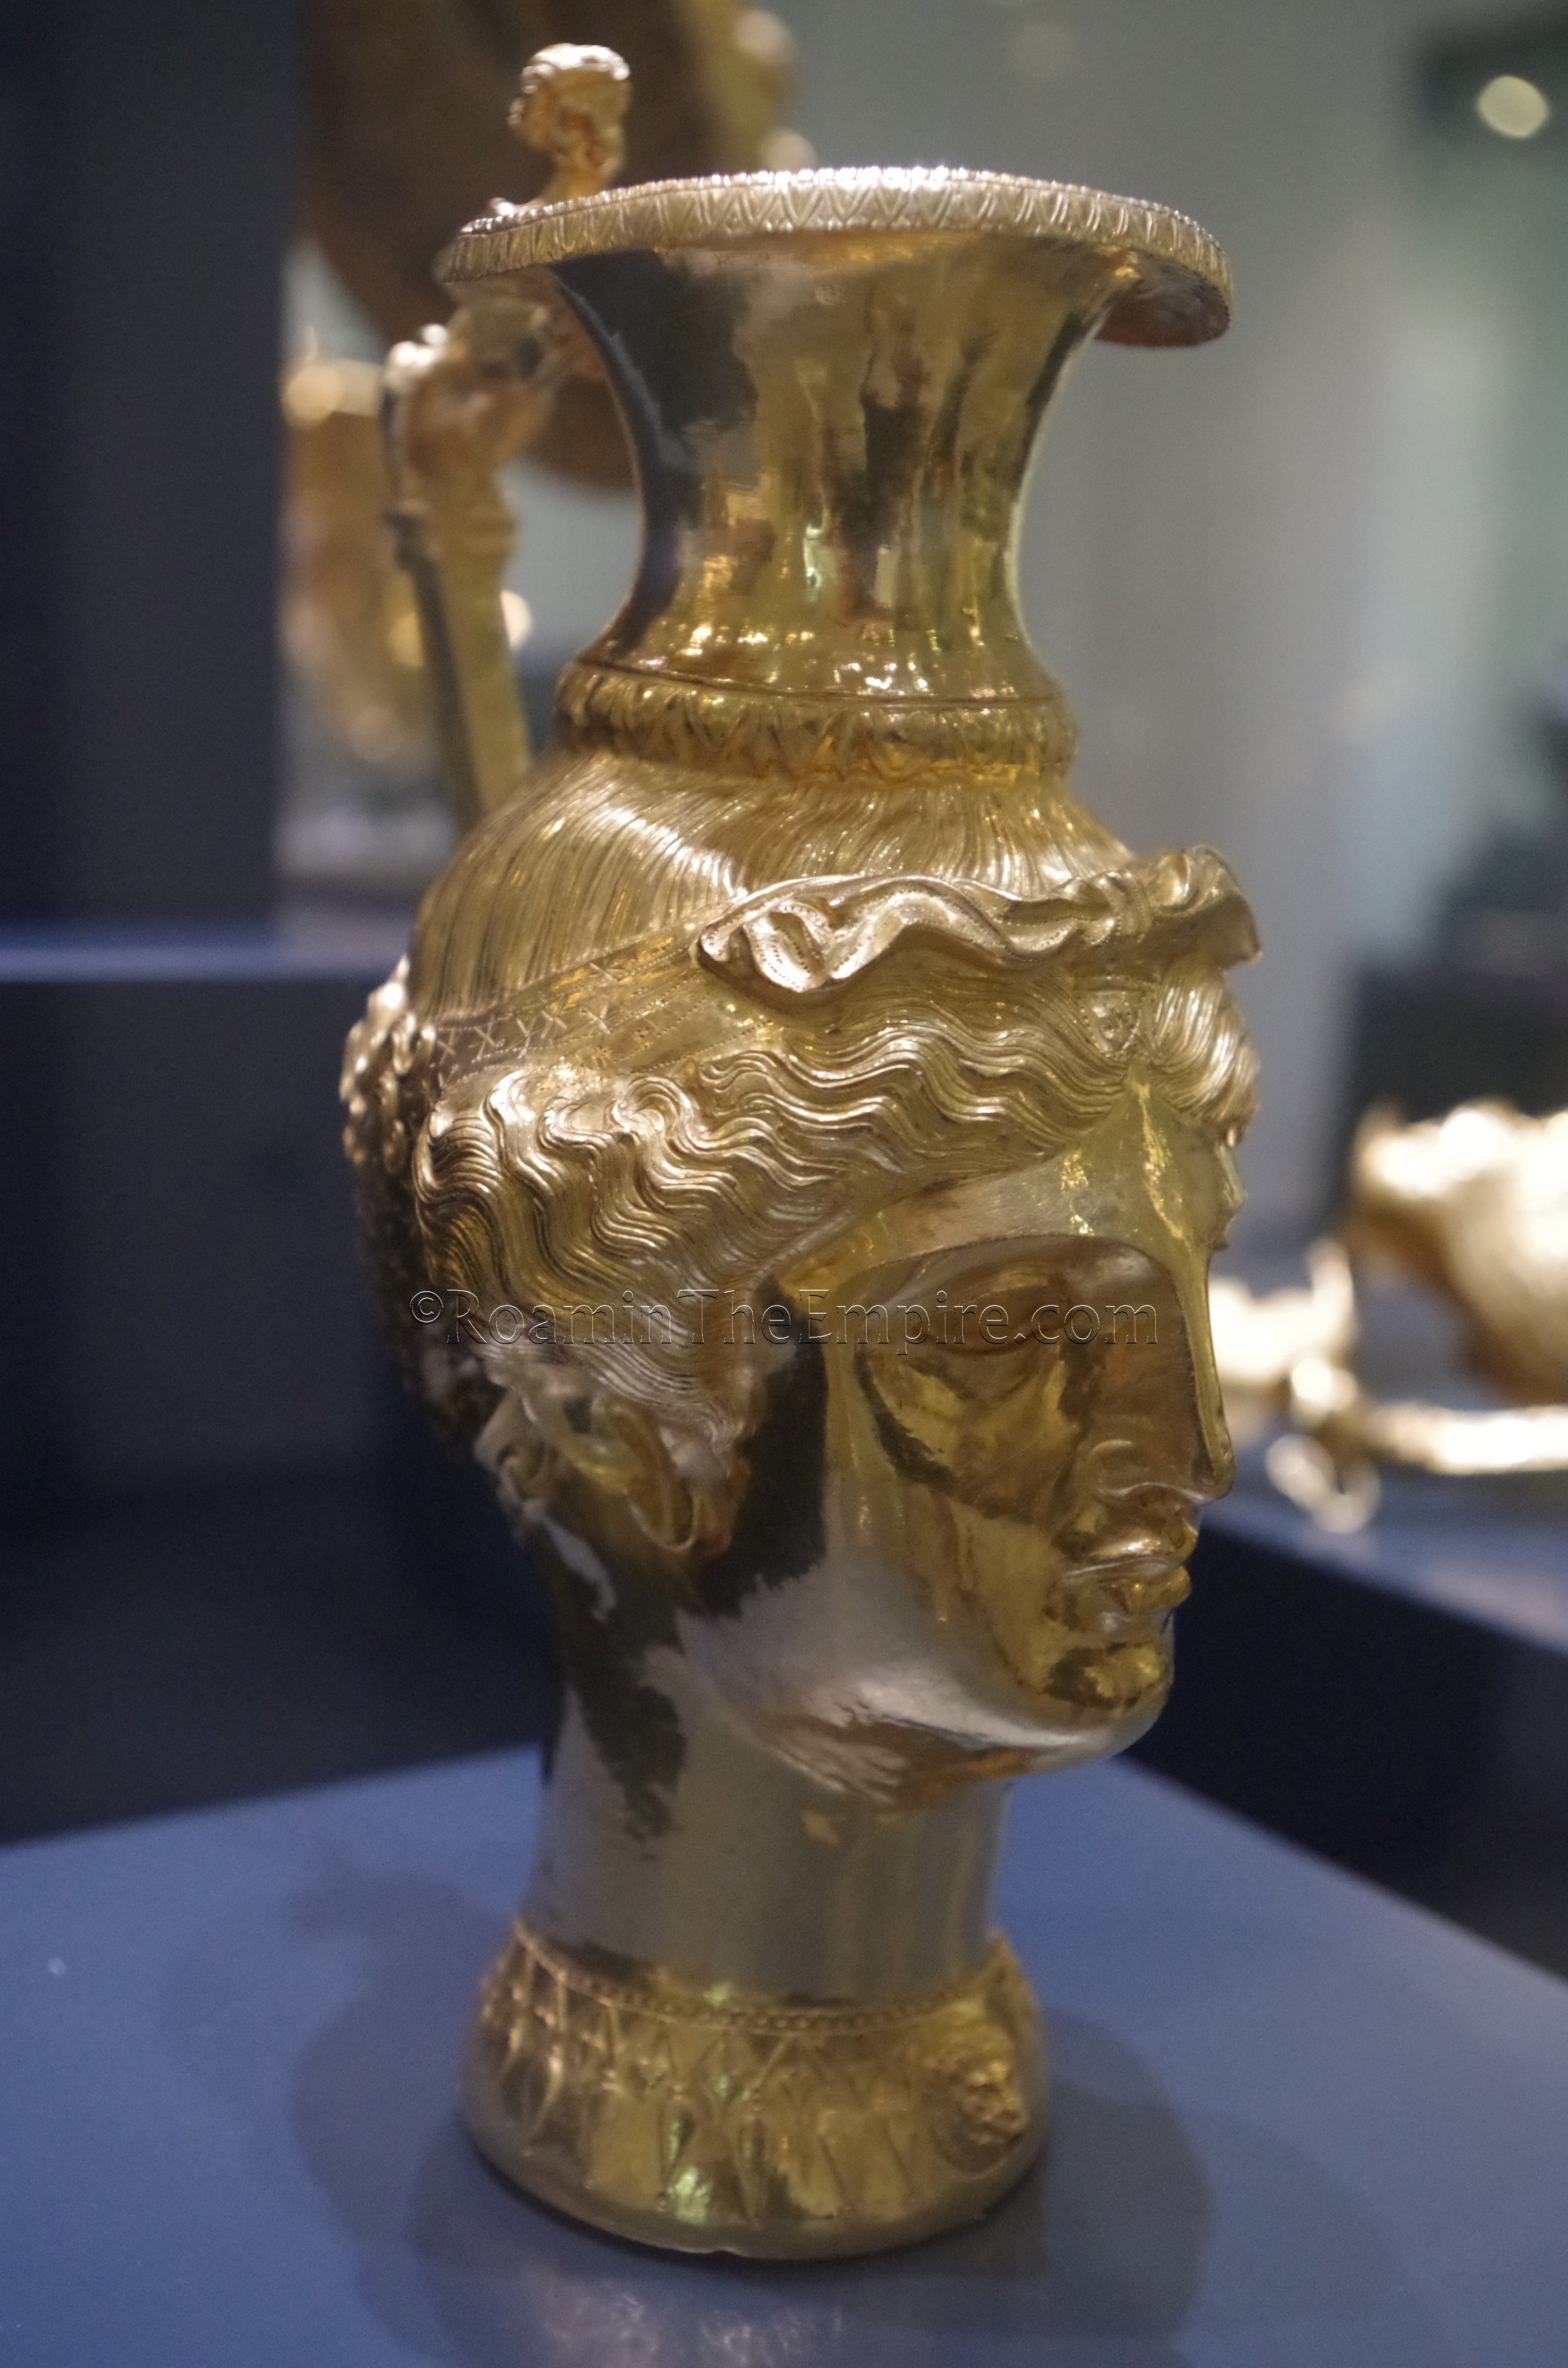 Gold rhyton in the shape of an Amazon's head. Part of the Panagyurishte Treasure. Regional Archaeological Museum.